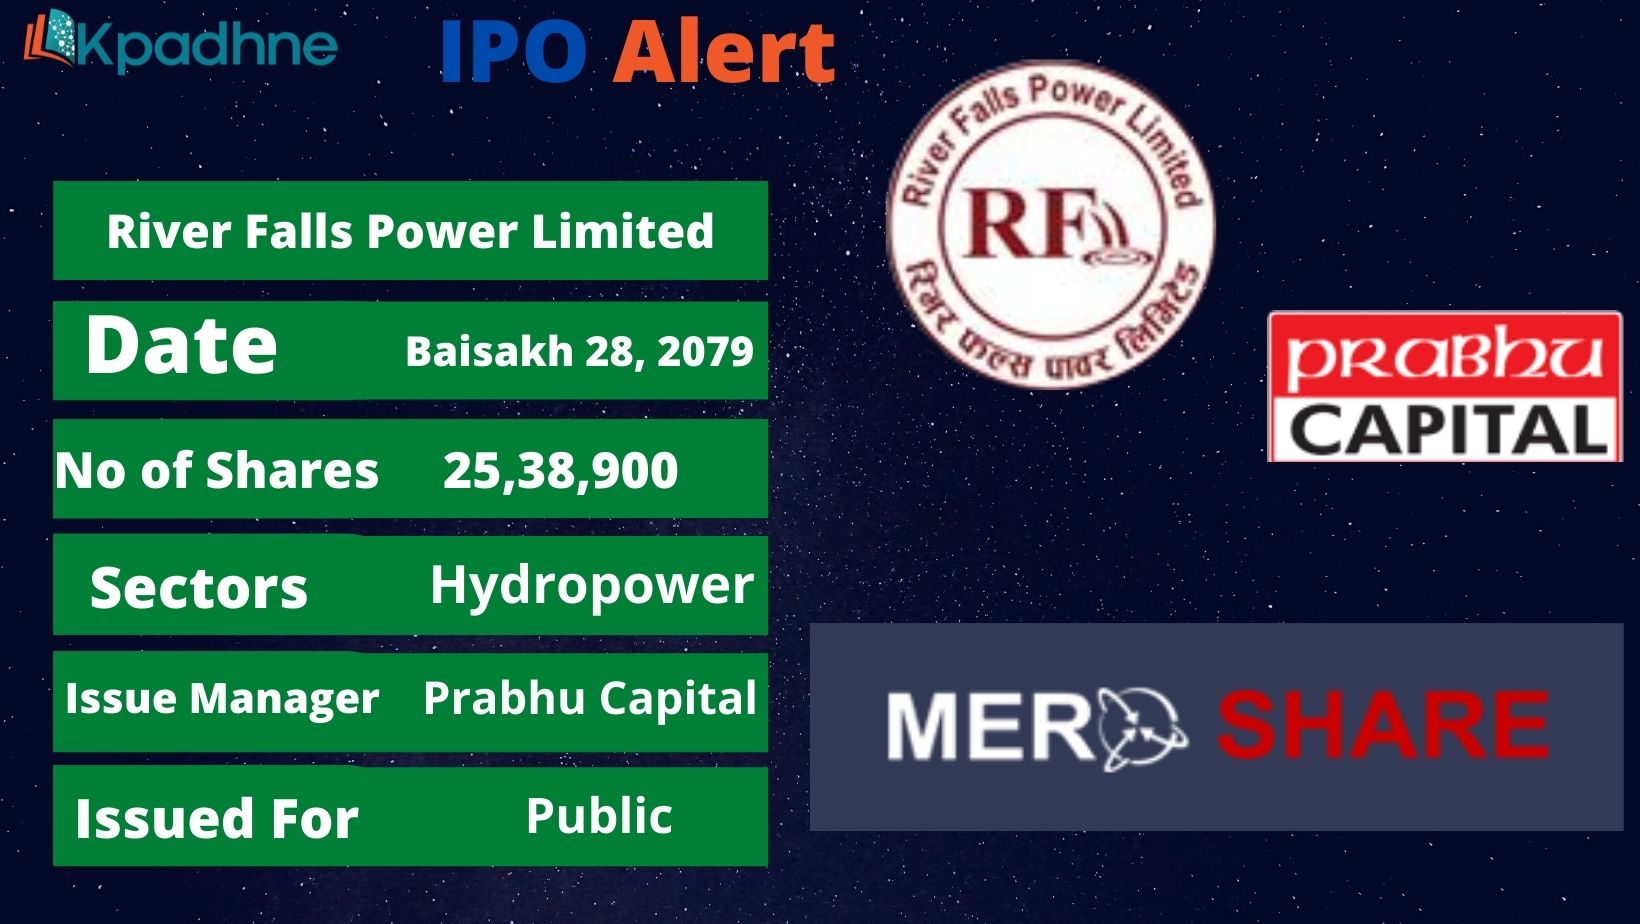 River Falls Power Limited to Issue 25,38,90,000 Worth of Shares to Public through IPO